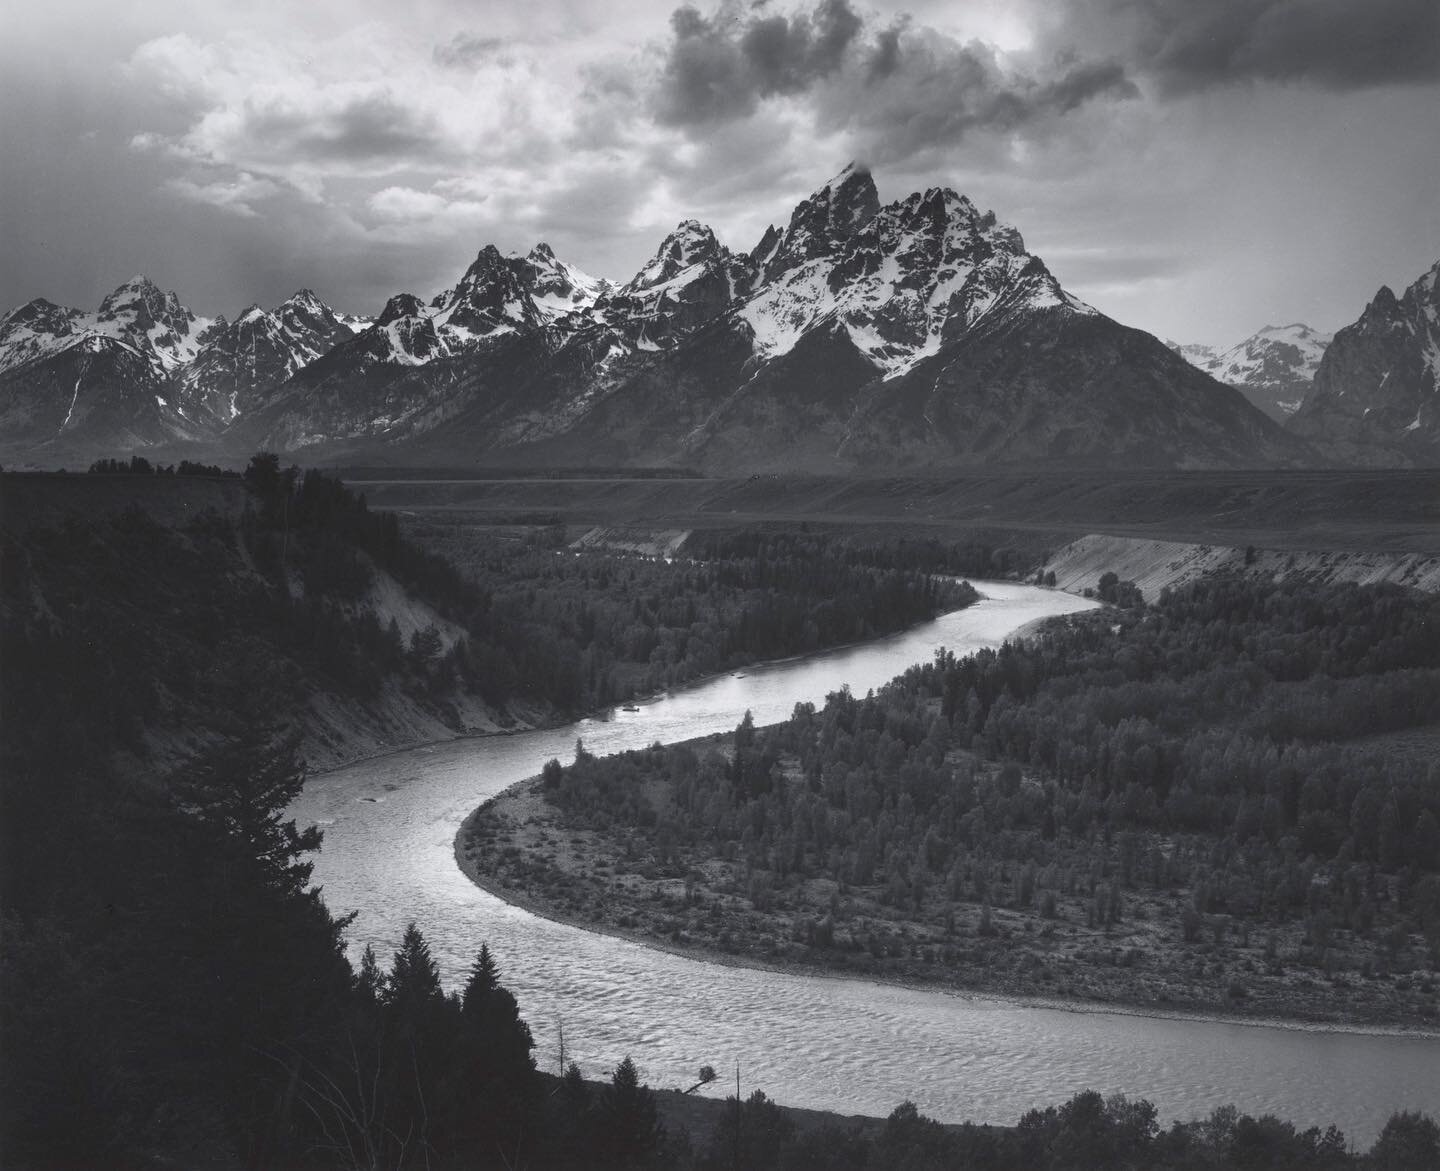 Ansel Adams was a photographer known for his images of the American landscape. His commitment to the natural world extended beyond his photography through his work as an environmental rights activist. In &ldquo;The Tetons and the Snake River,&rdquo; 